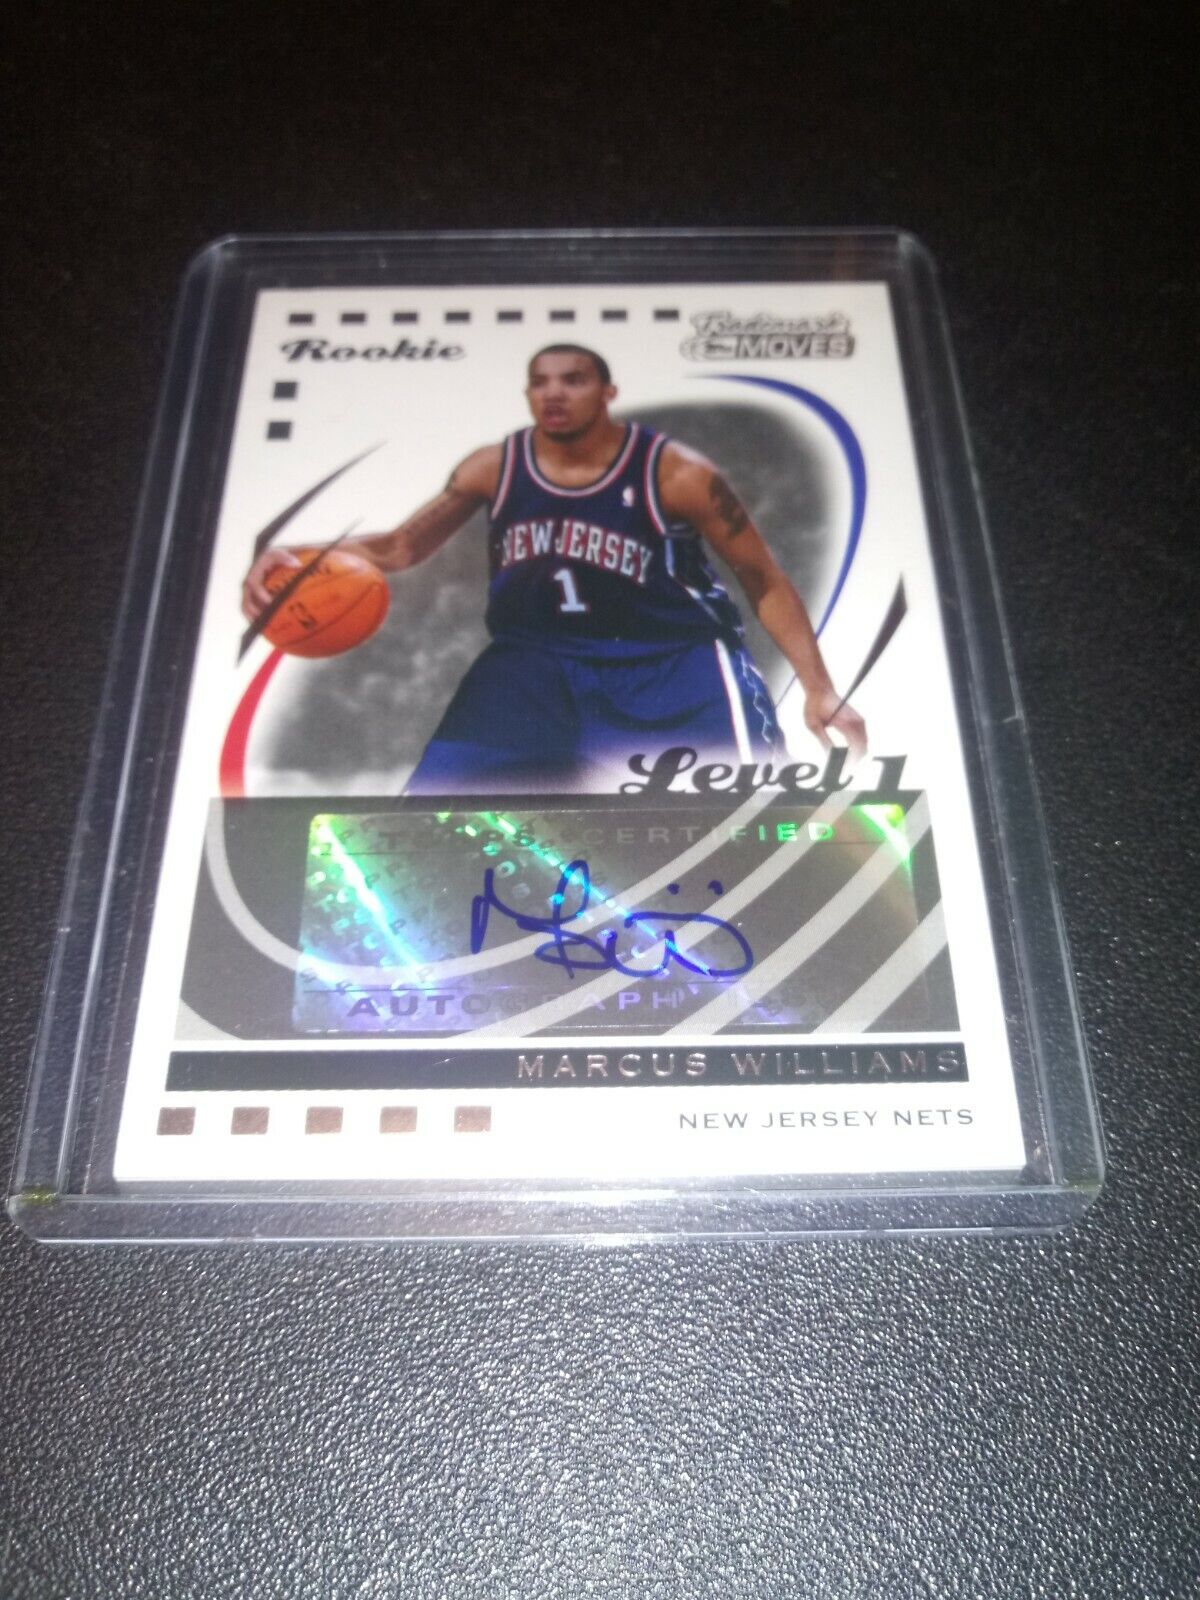 2006-07 Marcus Williams TOPPS TRADEMARK MOVES AUTOGRAPH #D 75/75 NETS